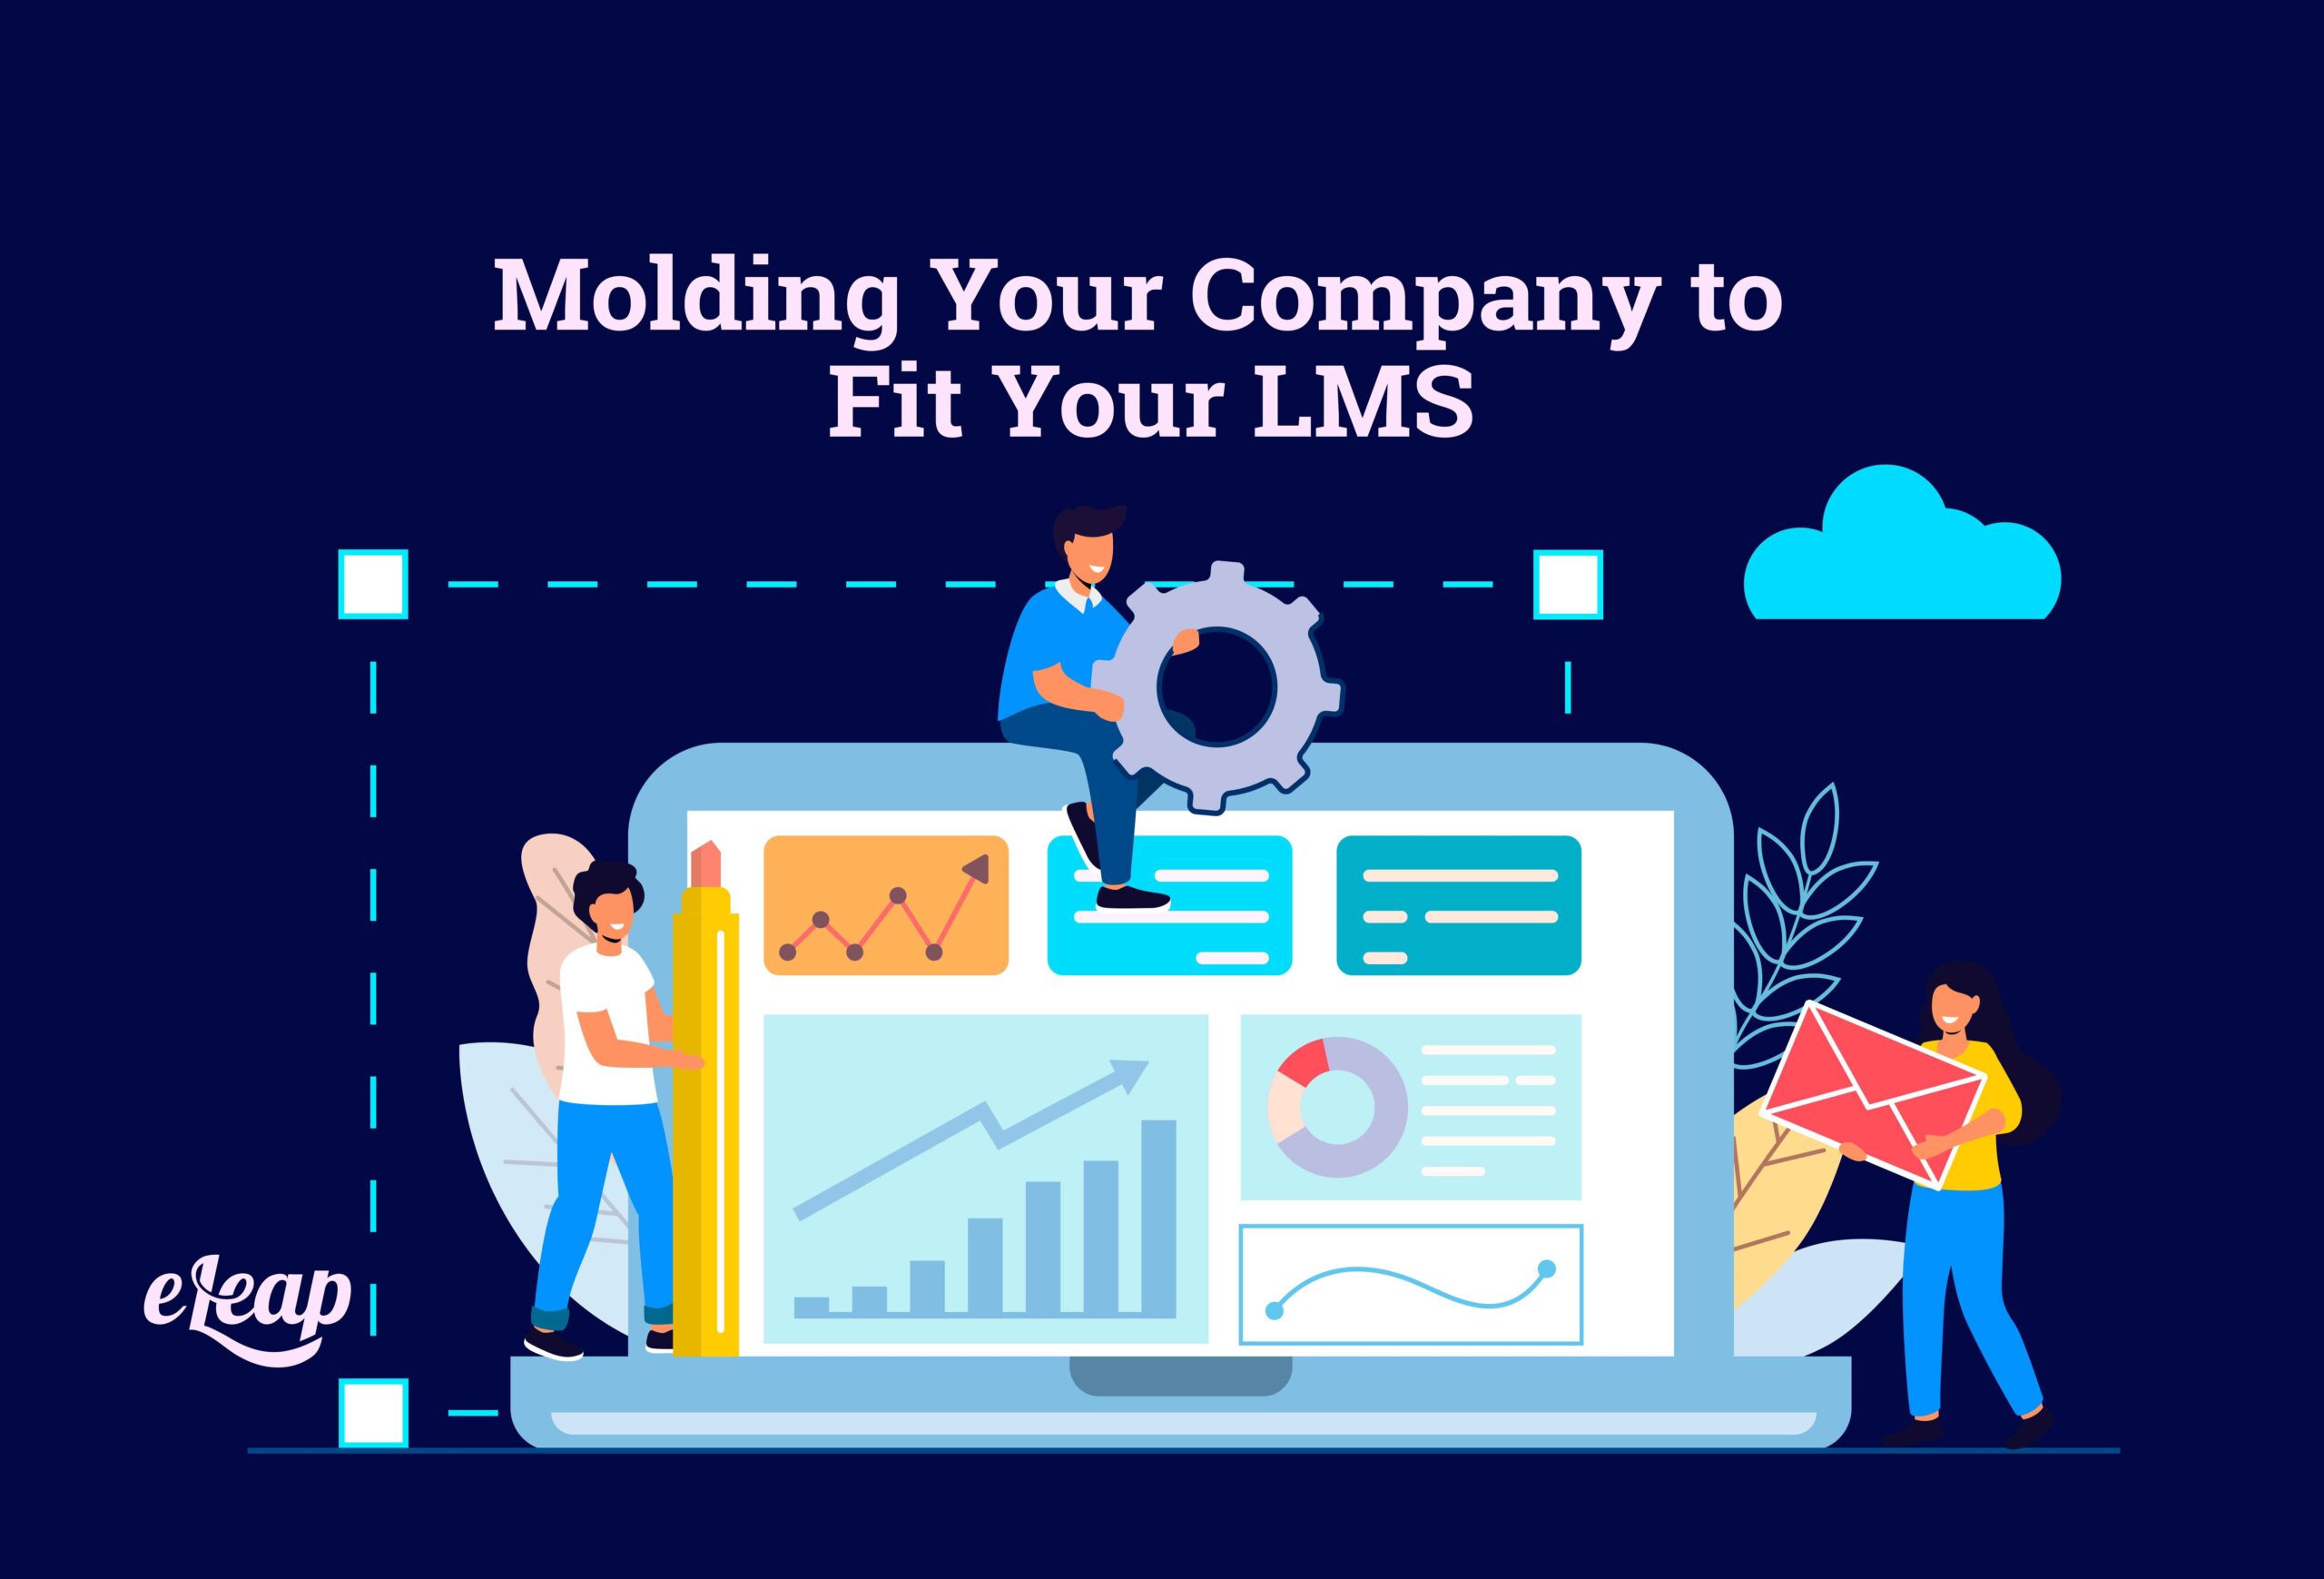 Molding Your Company to Fit Your LMS